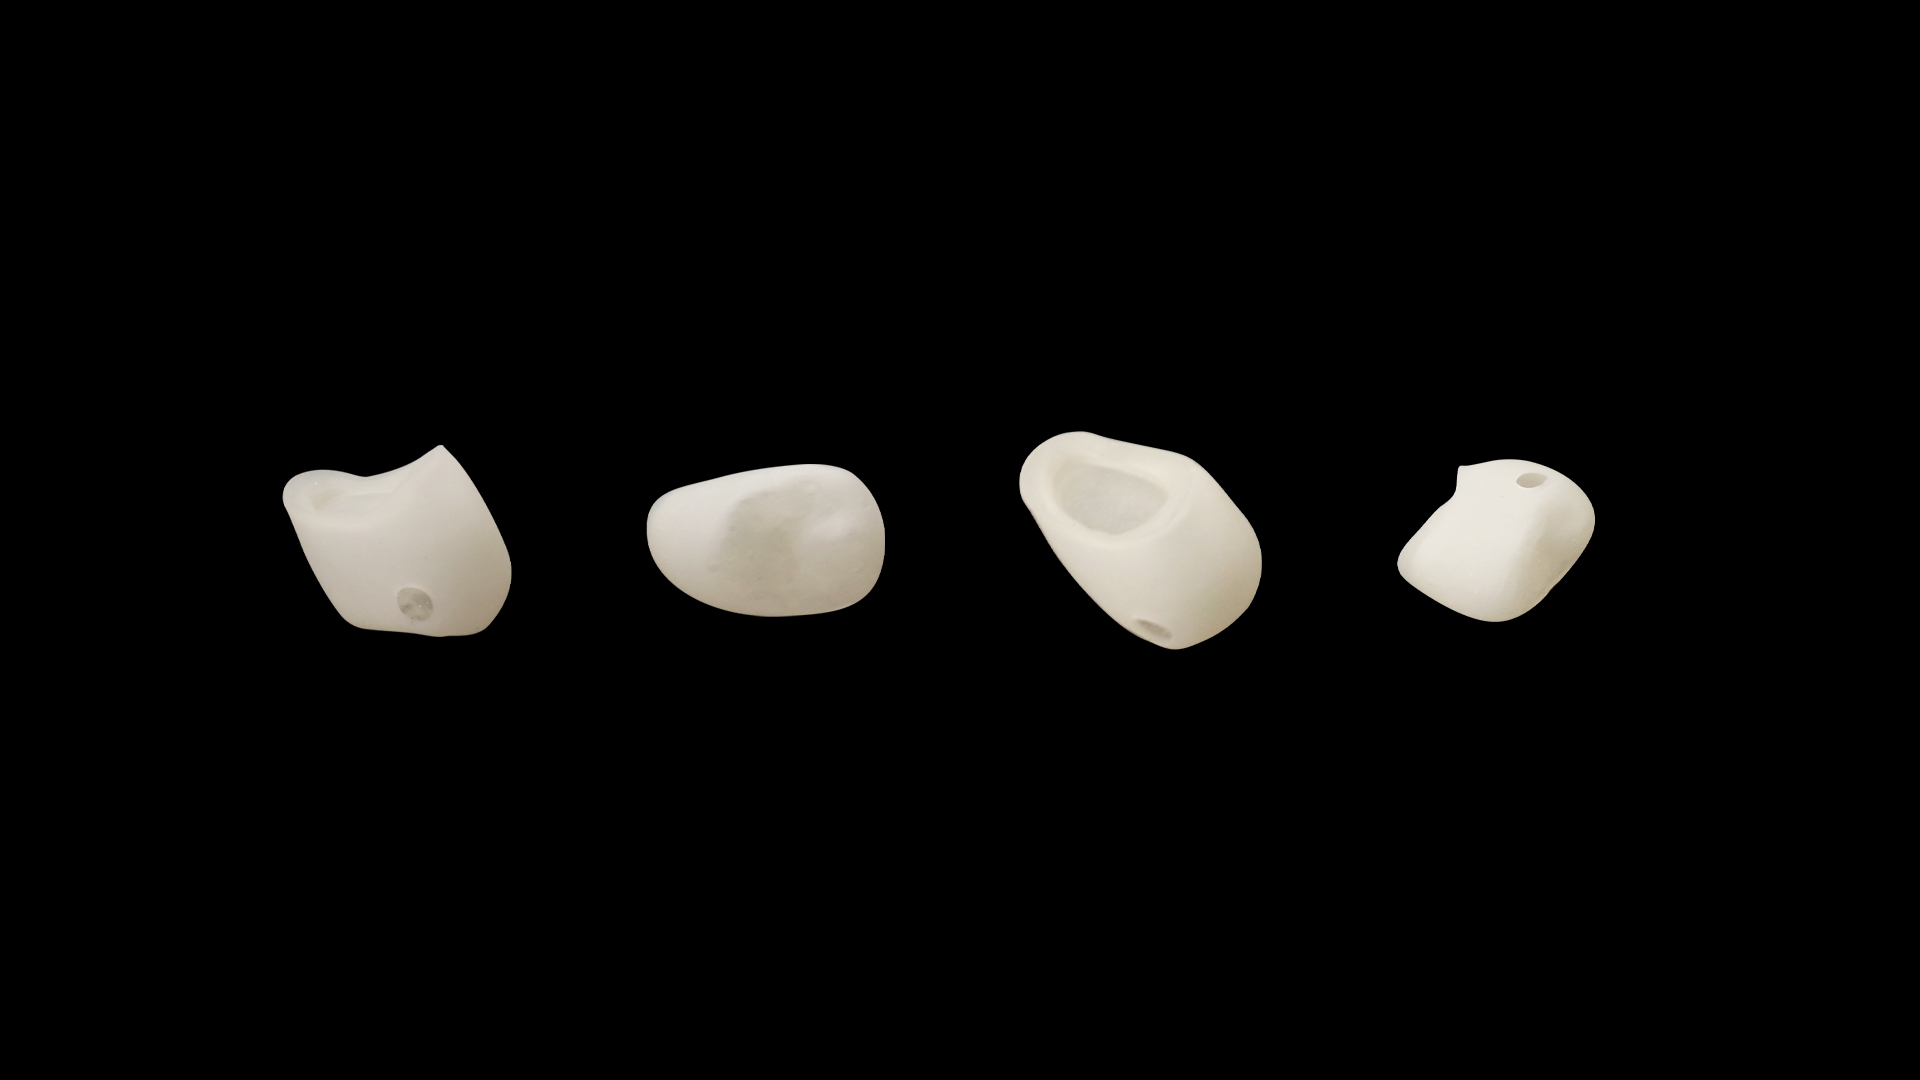 Which is better, 3D printed dental crown or traditional dental crown? What are the differences between 3D printed crowns and traditional crowns?